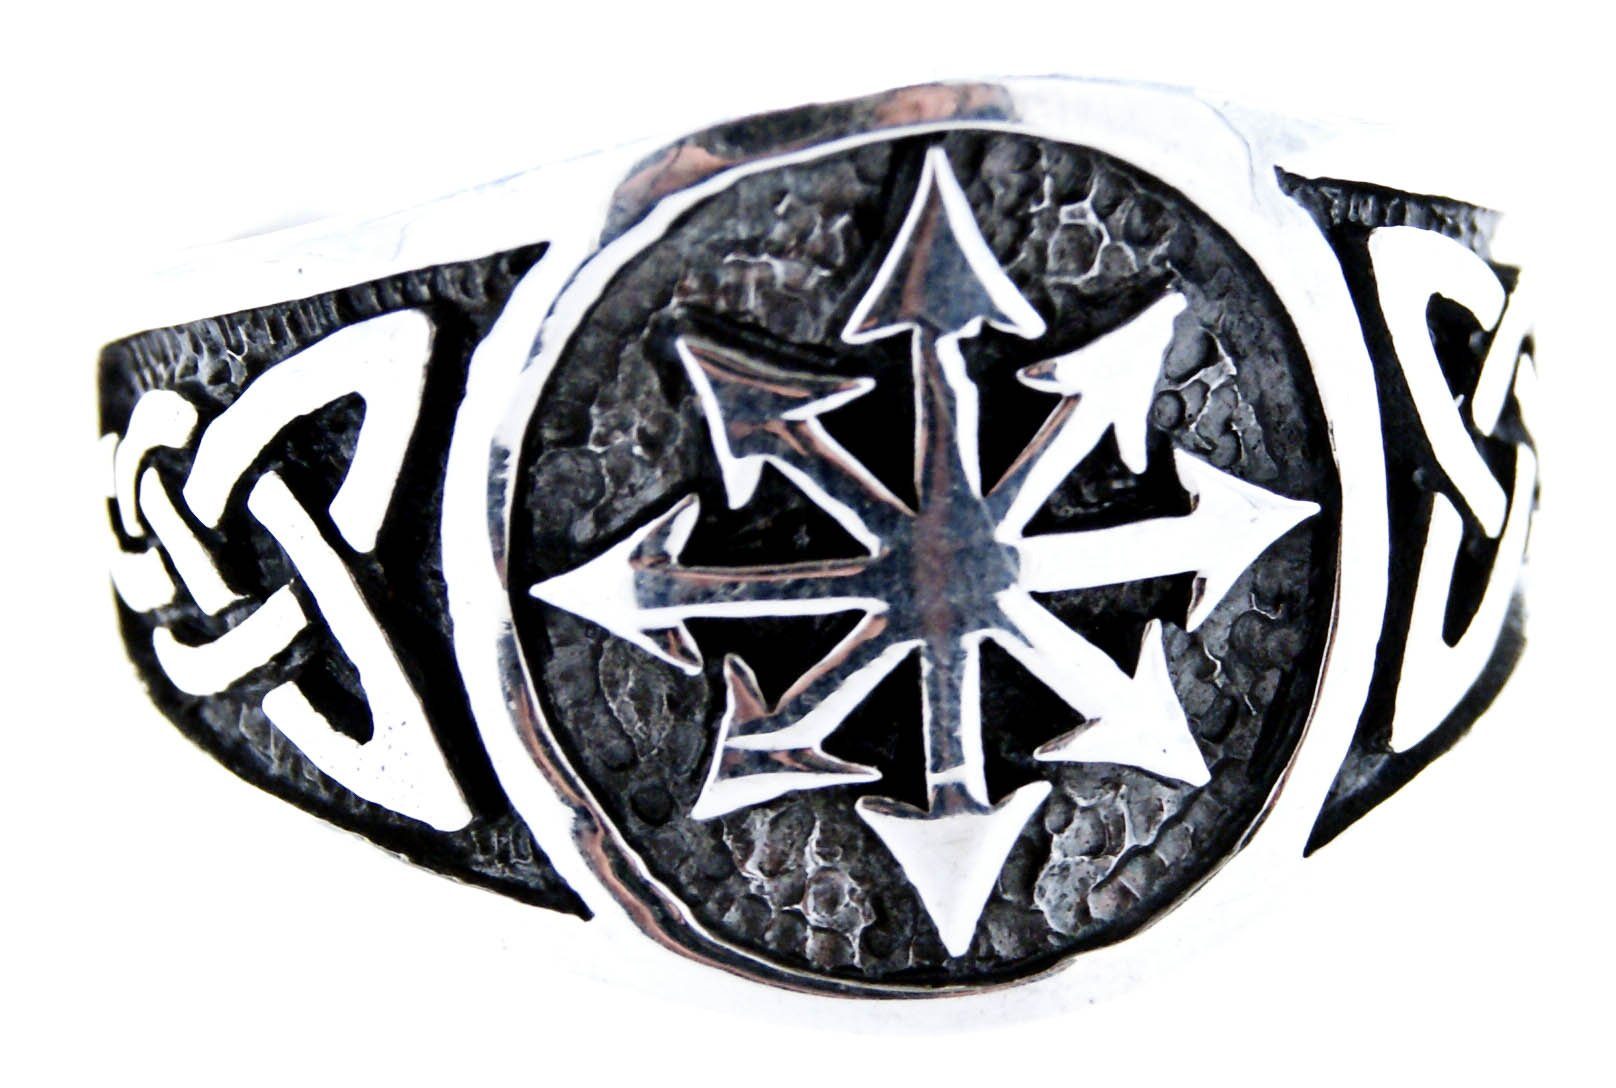 Fingerring Ring Magie Silberring Gr. of Leather Chaosstern, Stern 52-76 Kiss Chaos